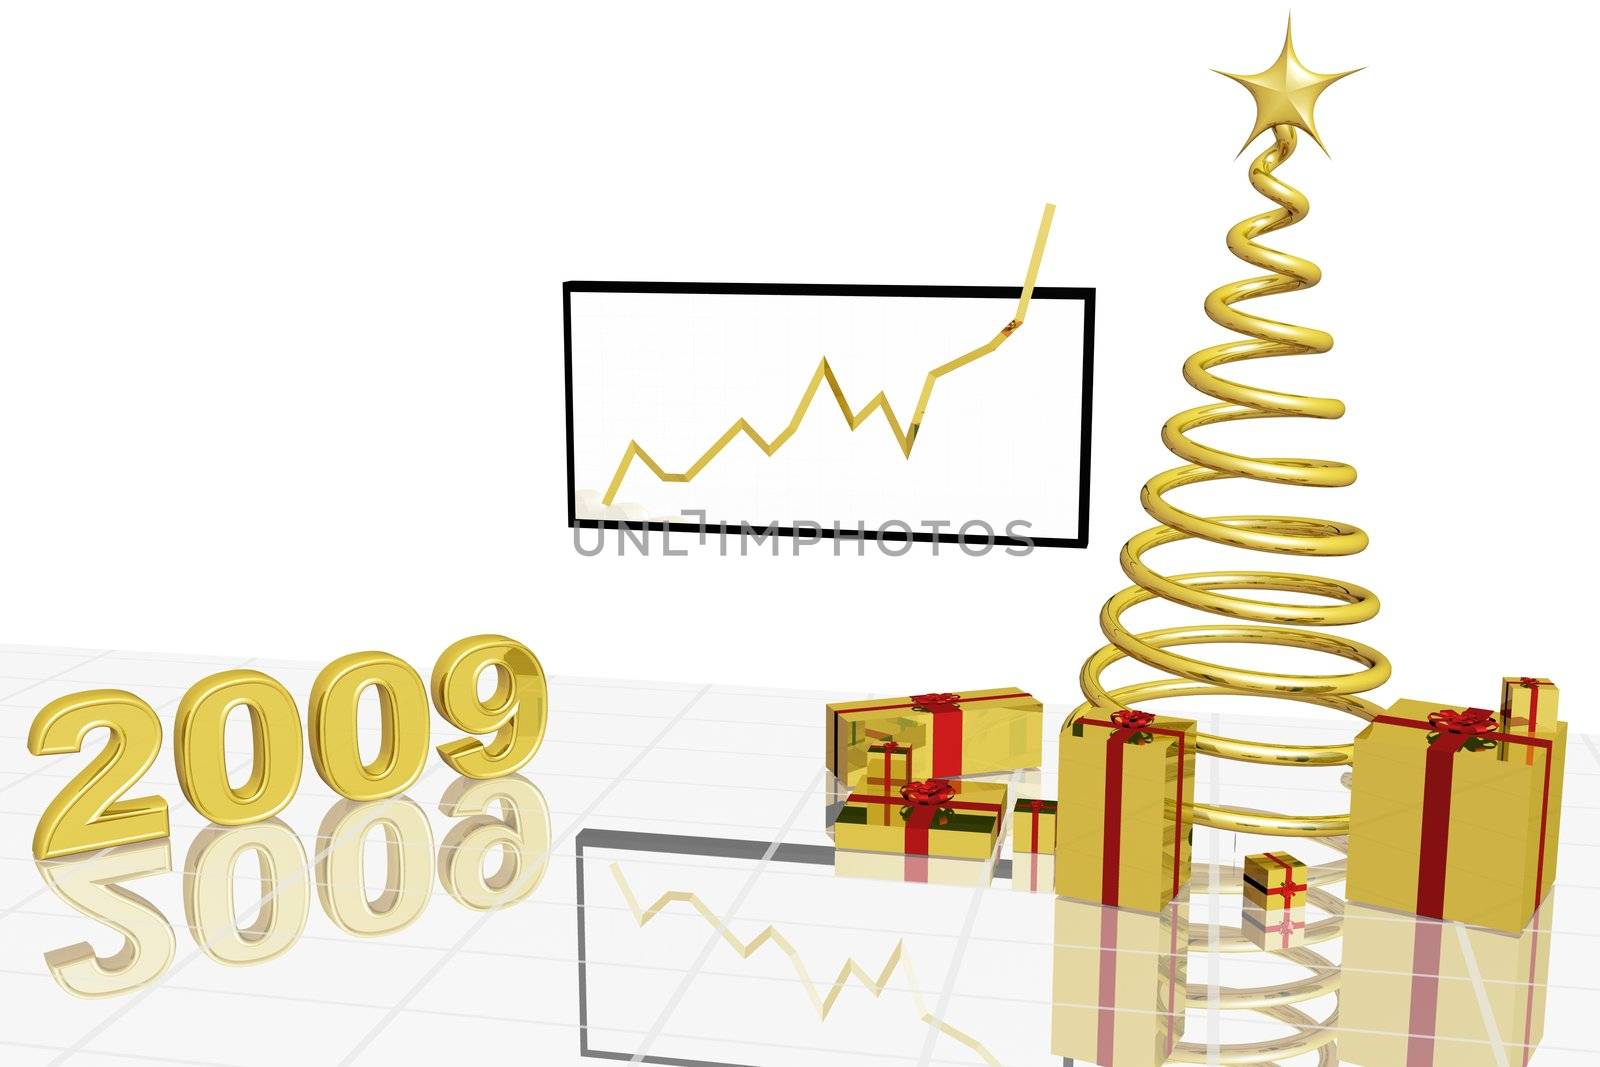 Xmas tree with gifts, successful chart and date 2009.